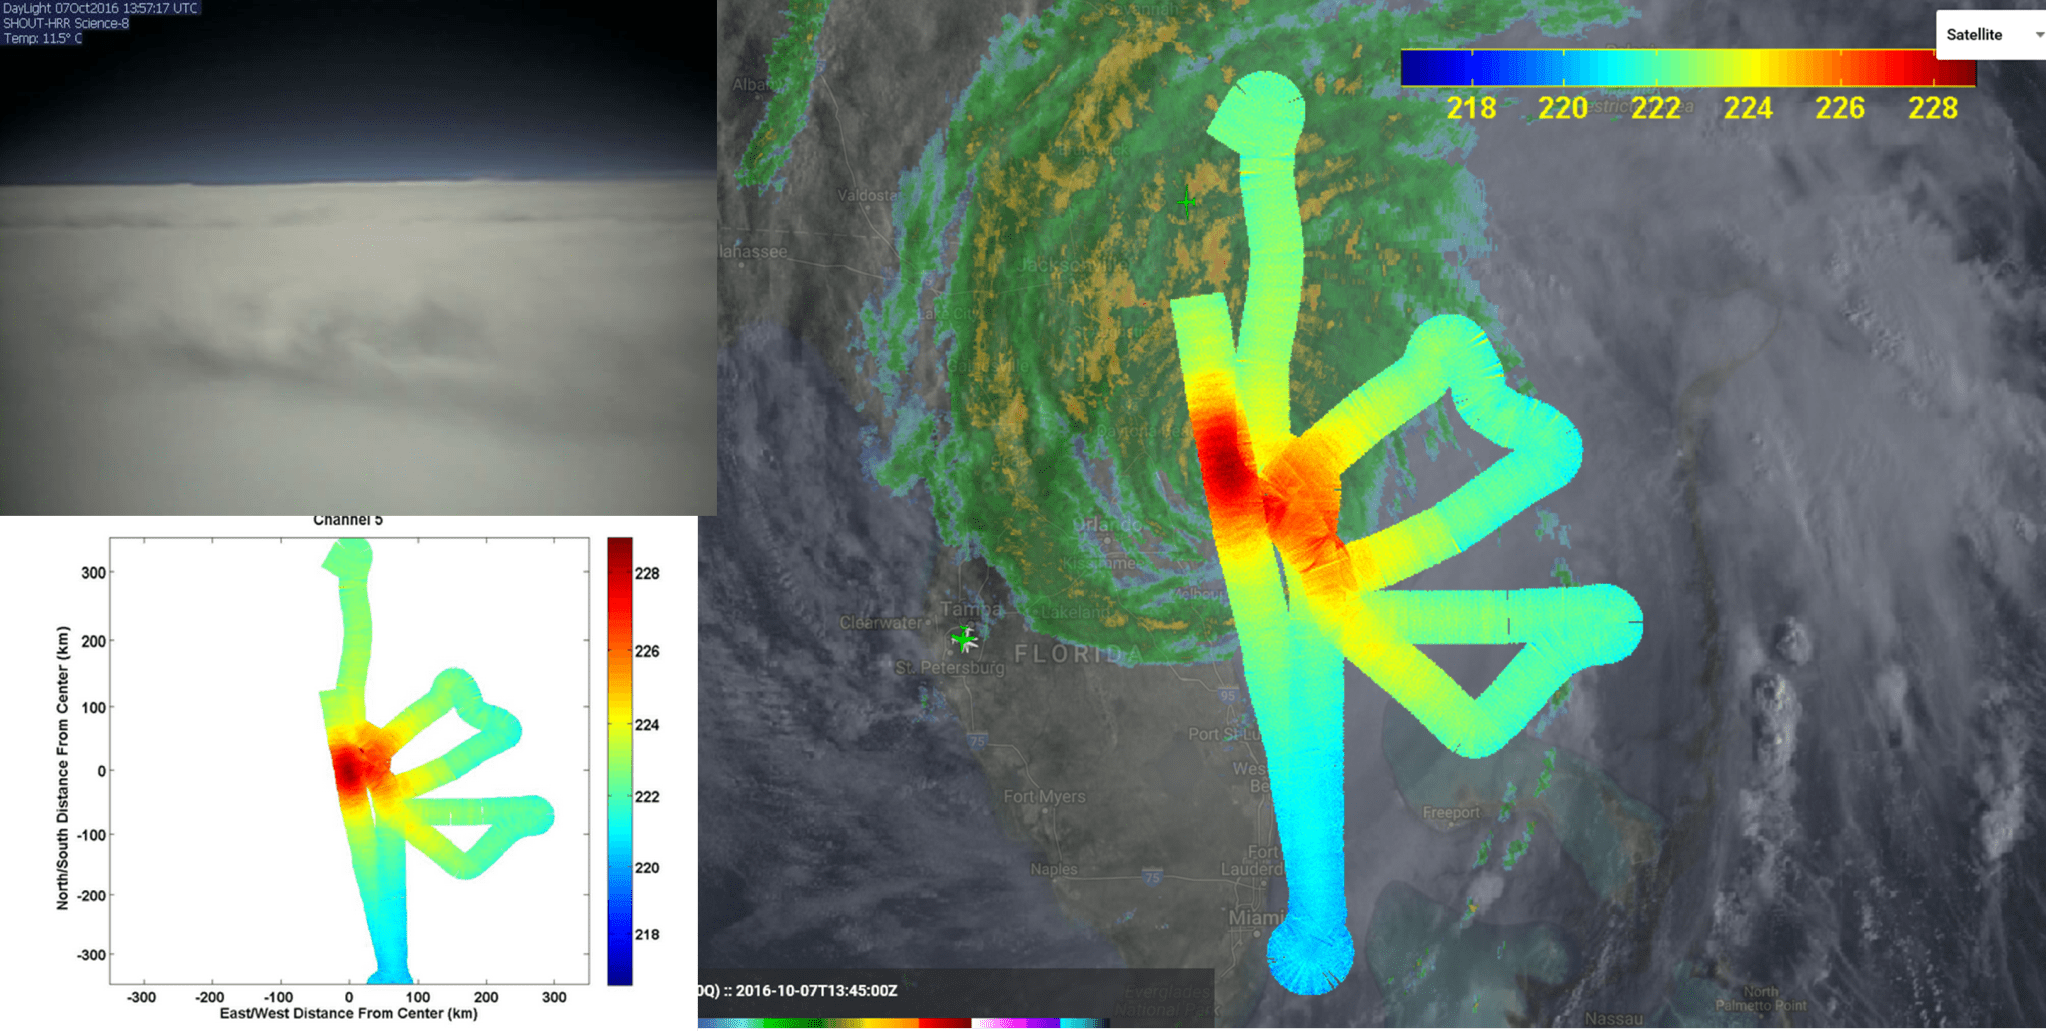 Satellite image of Hurricane Matthew with the path of the Global Hawk marked in a bright rainbow line.